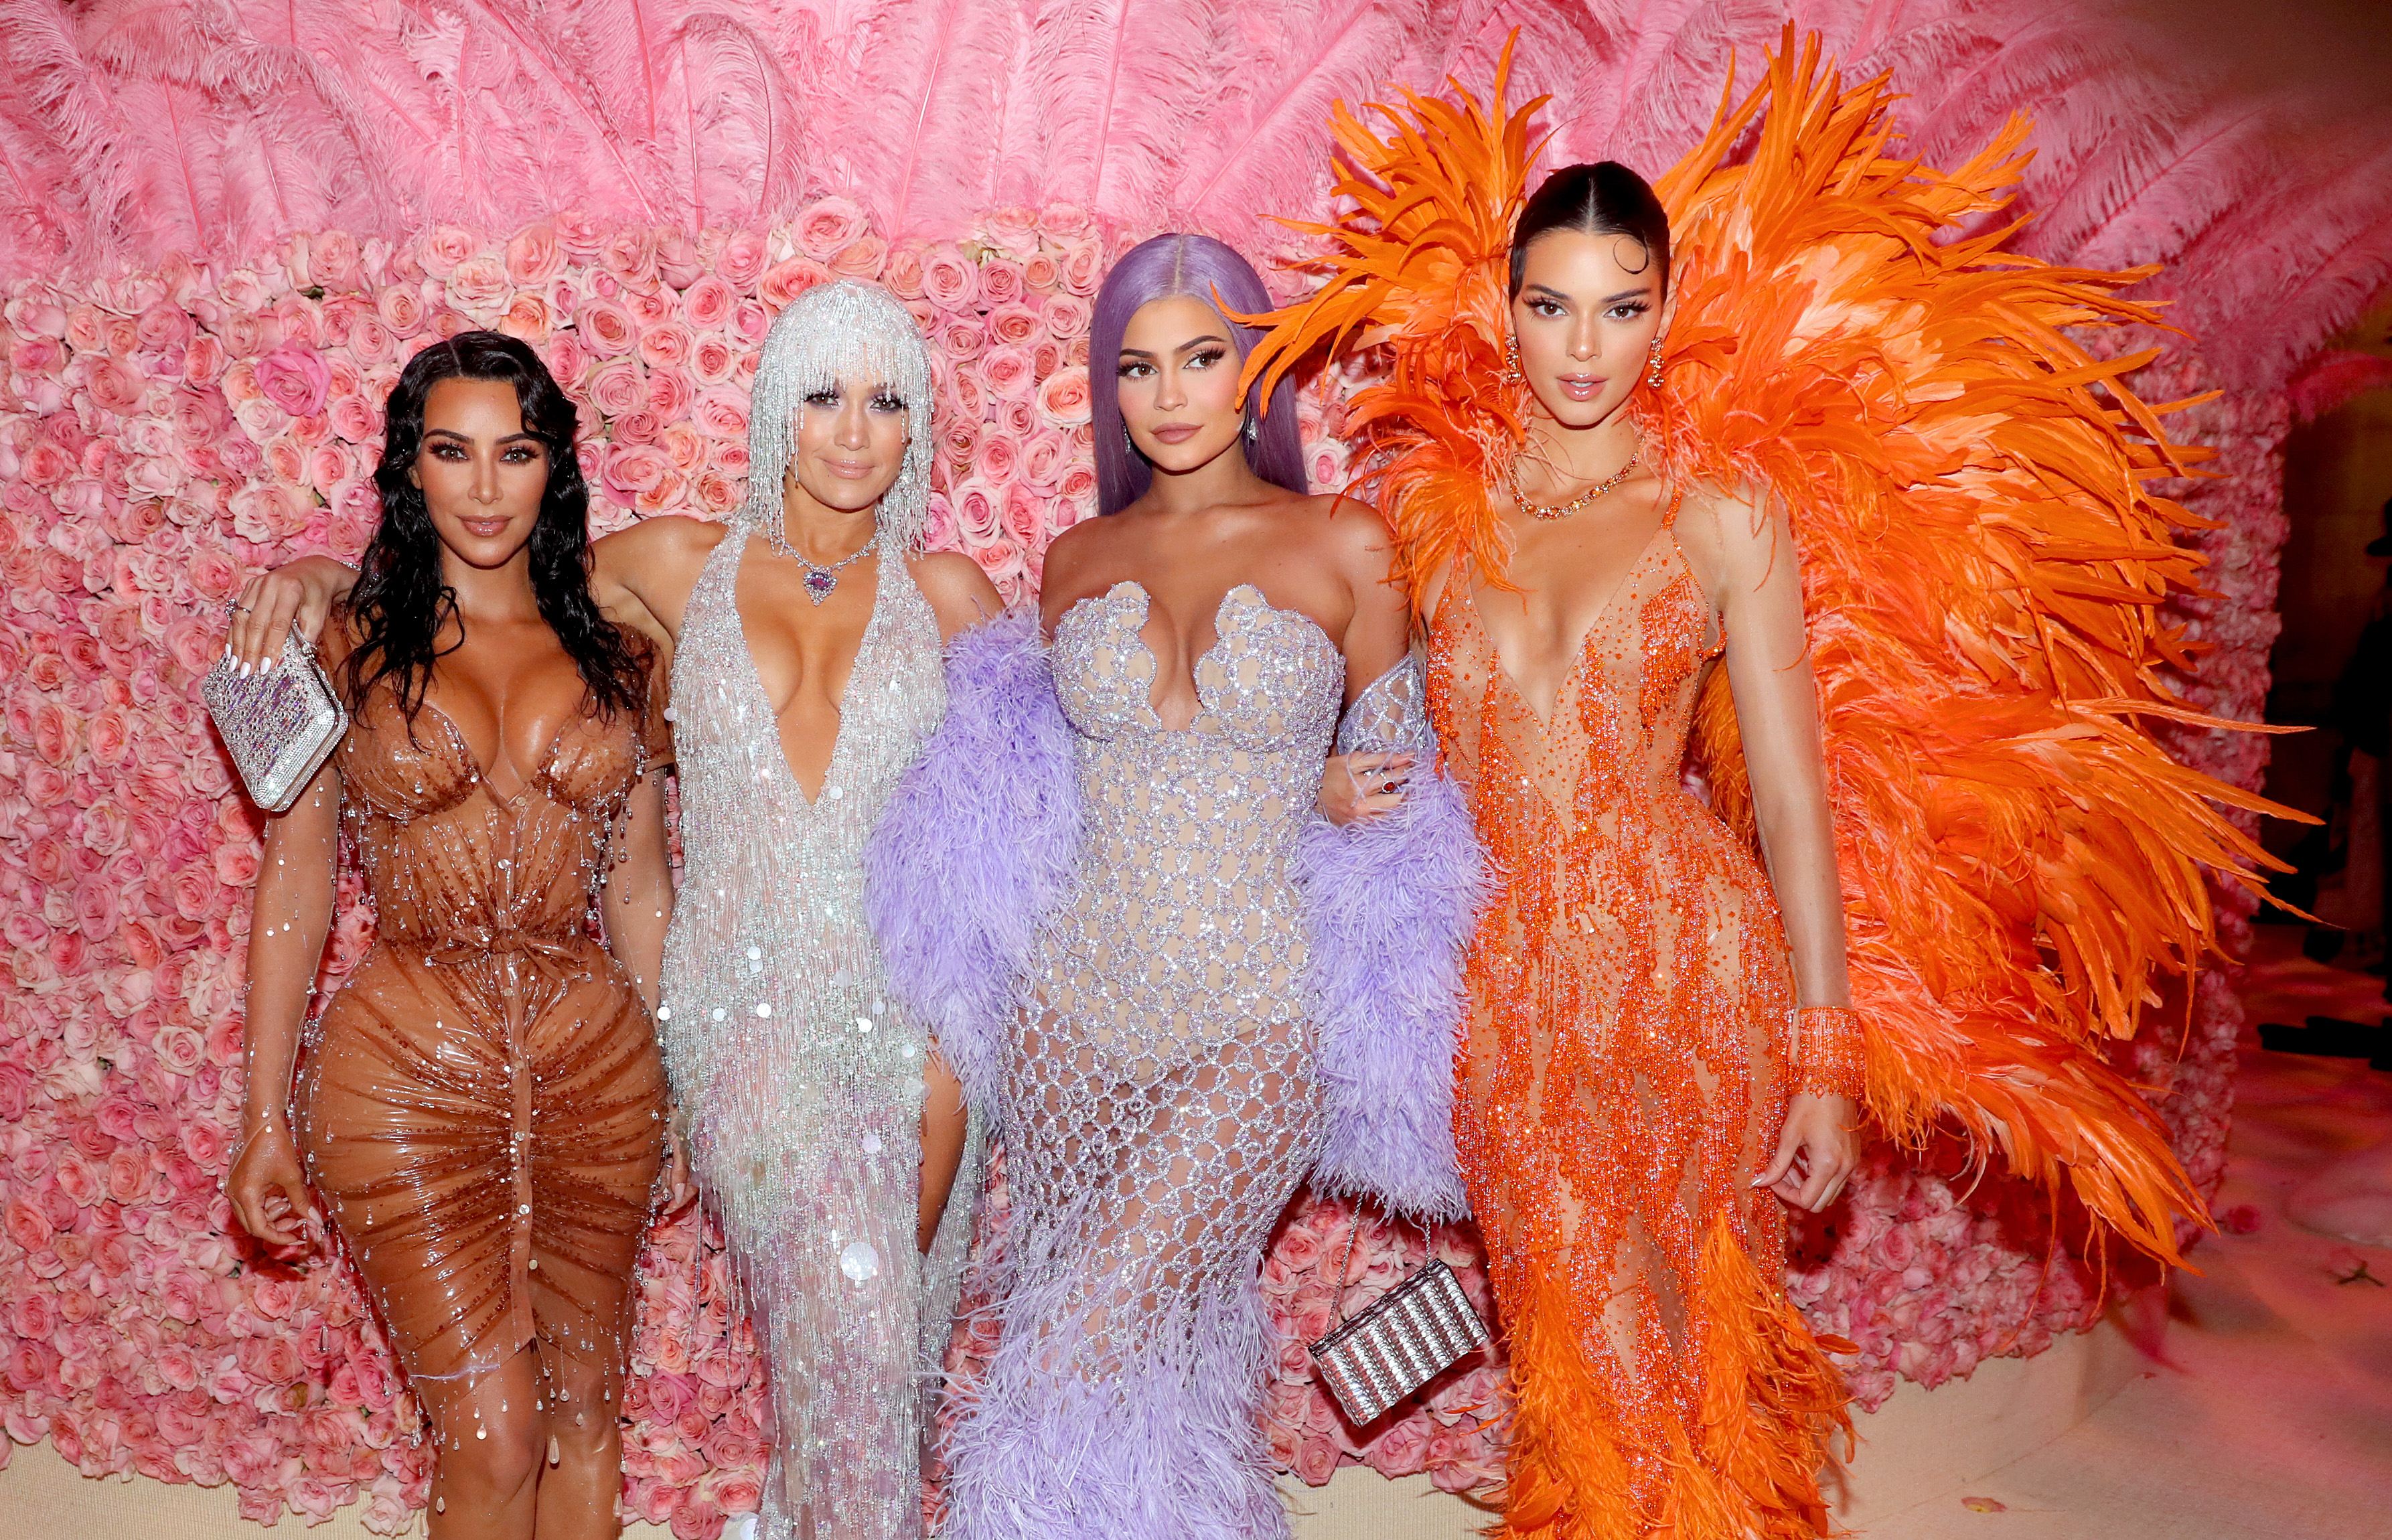 Met Gala 2021: Date, Theme and Seating ...